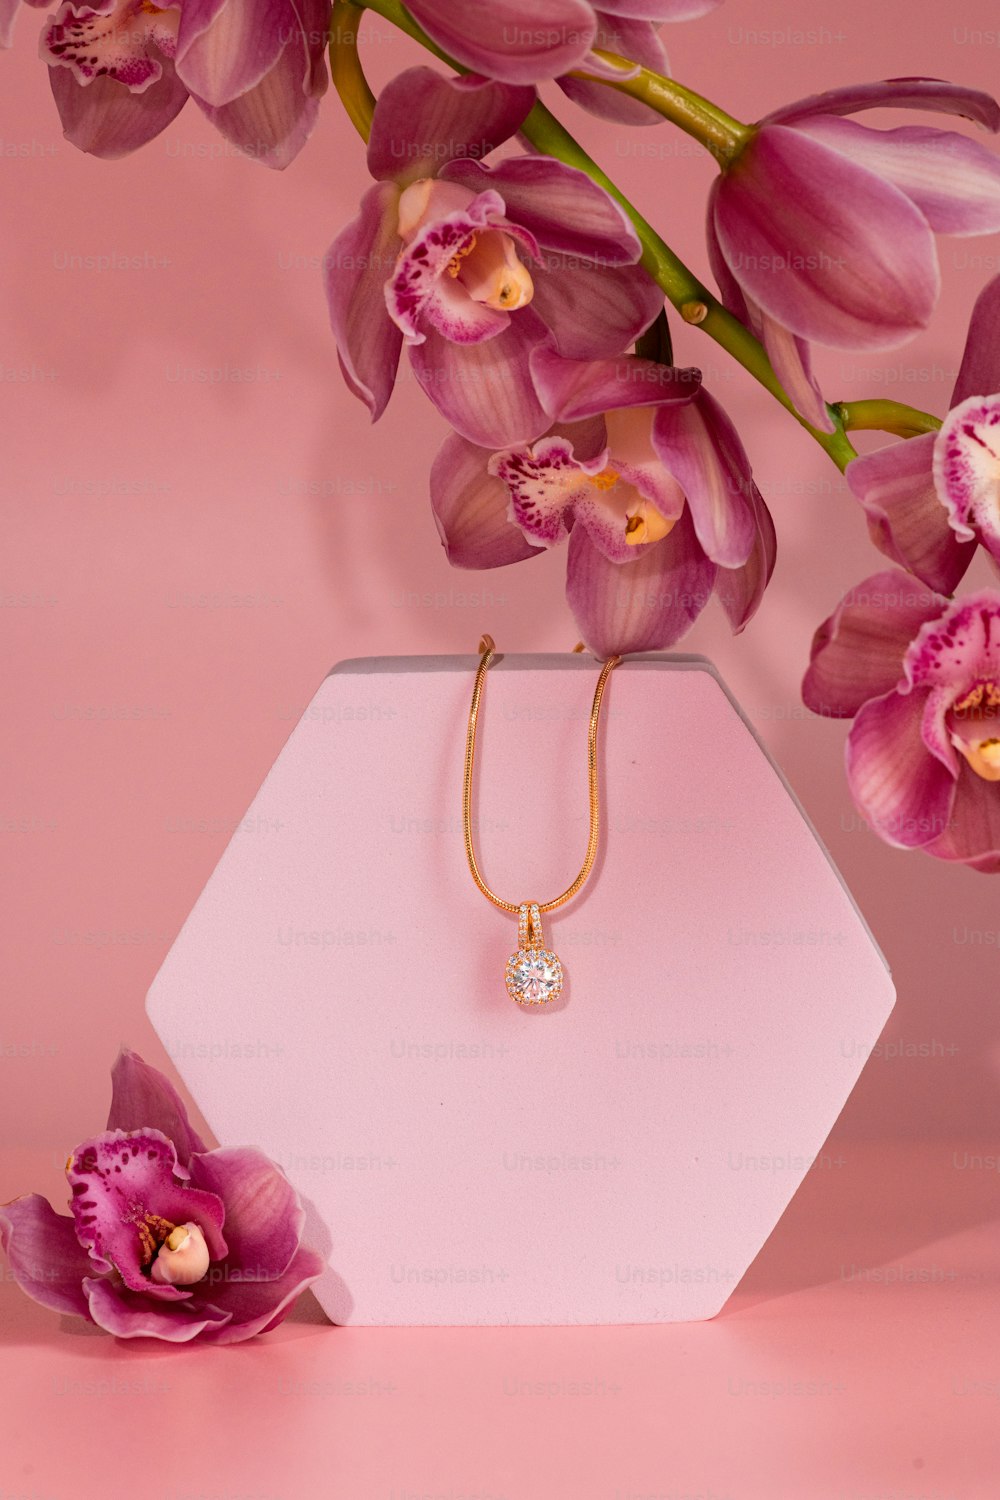 a pink vase with flowers and a diamond necklace